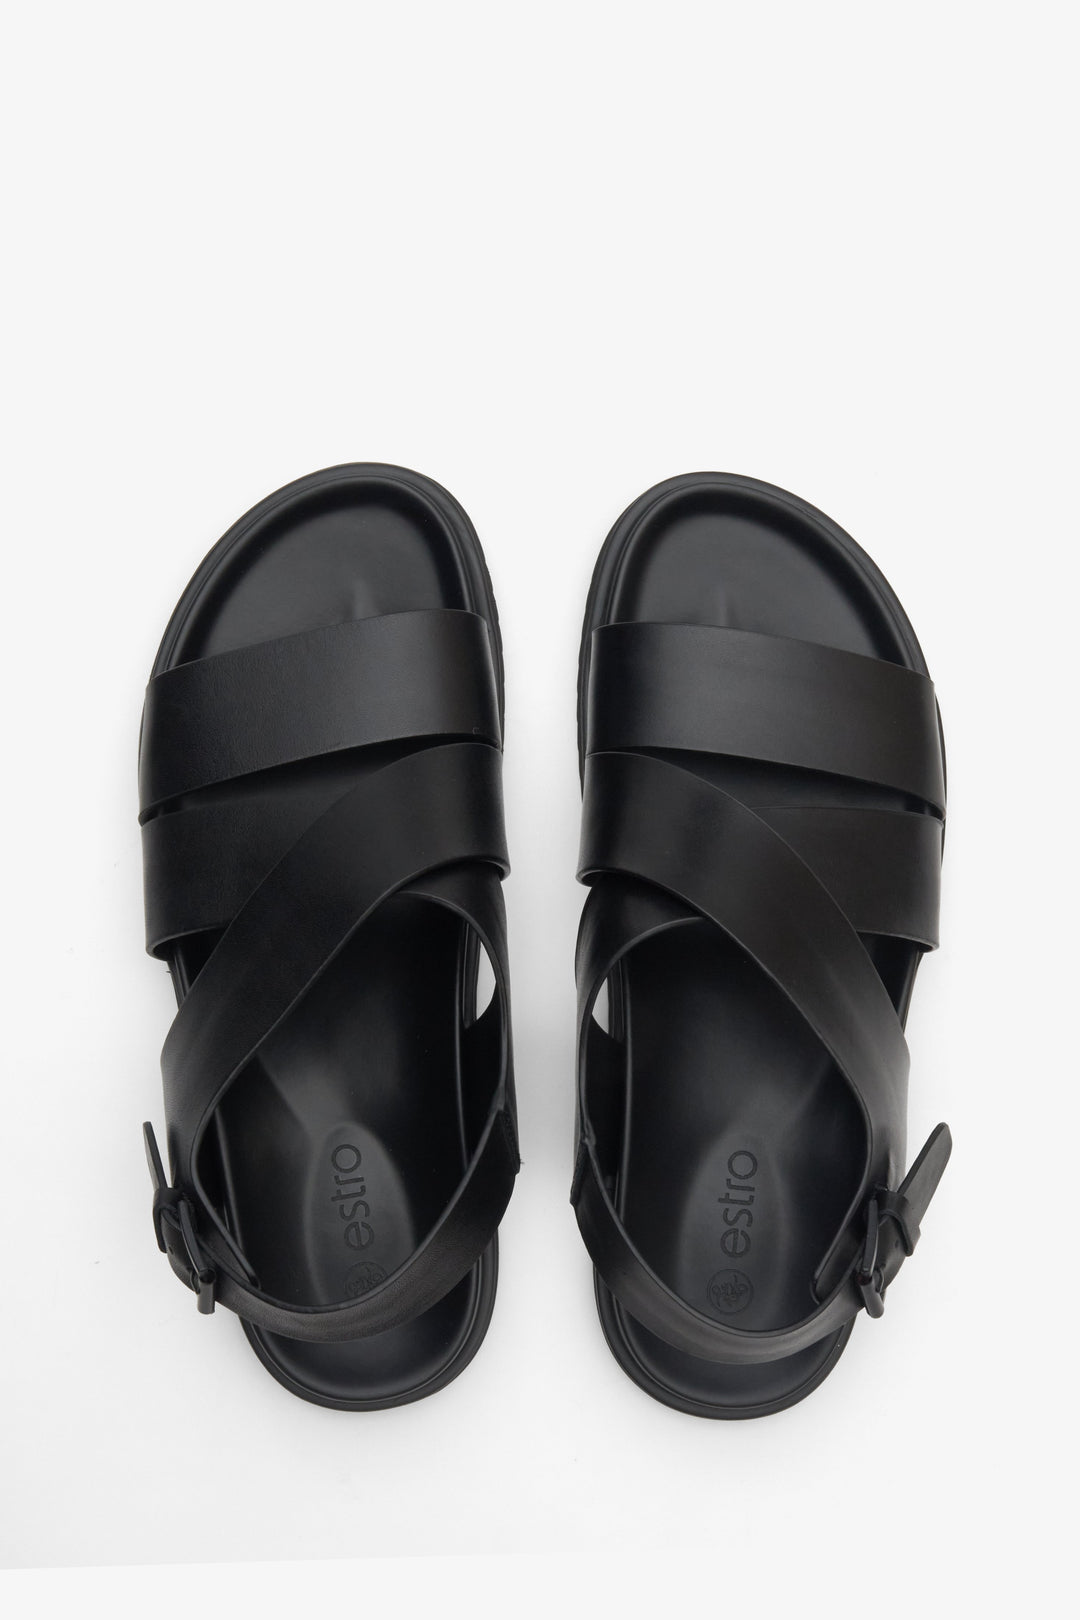 Men's black leather sandals by Estro - top view presentation of the model.